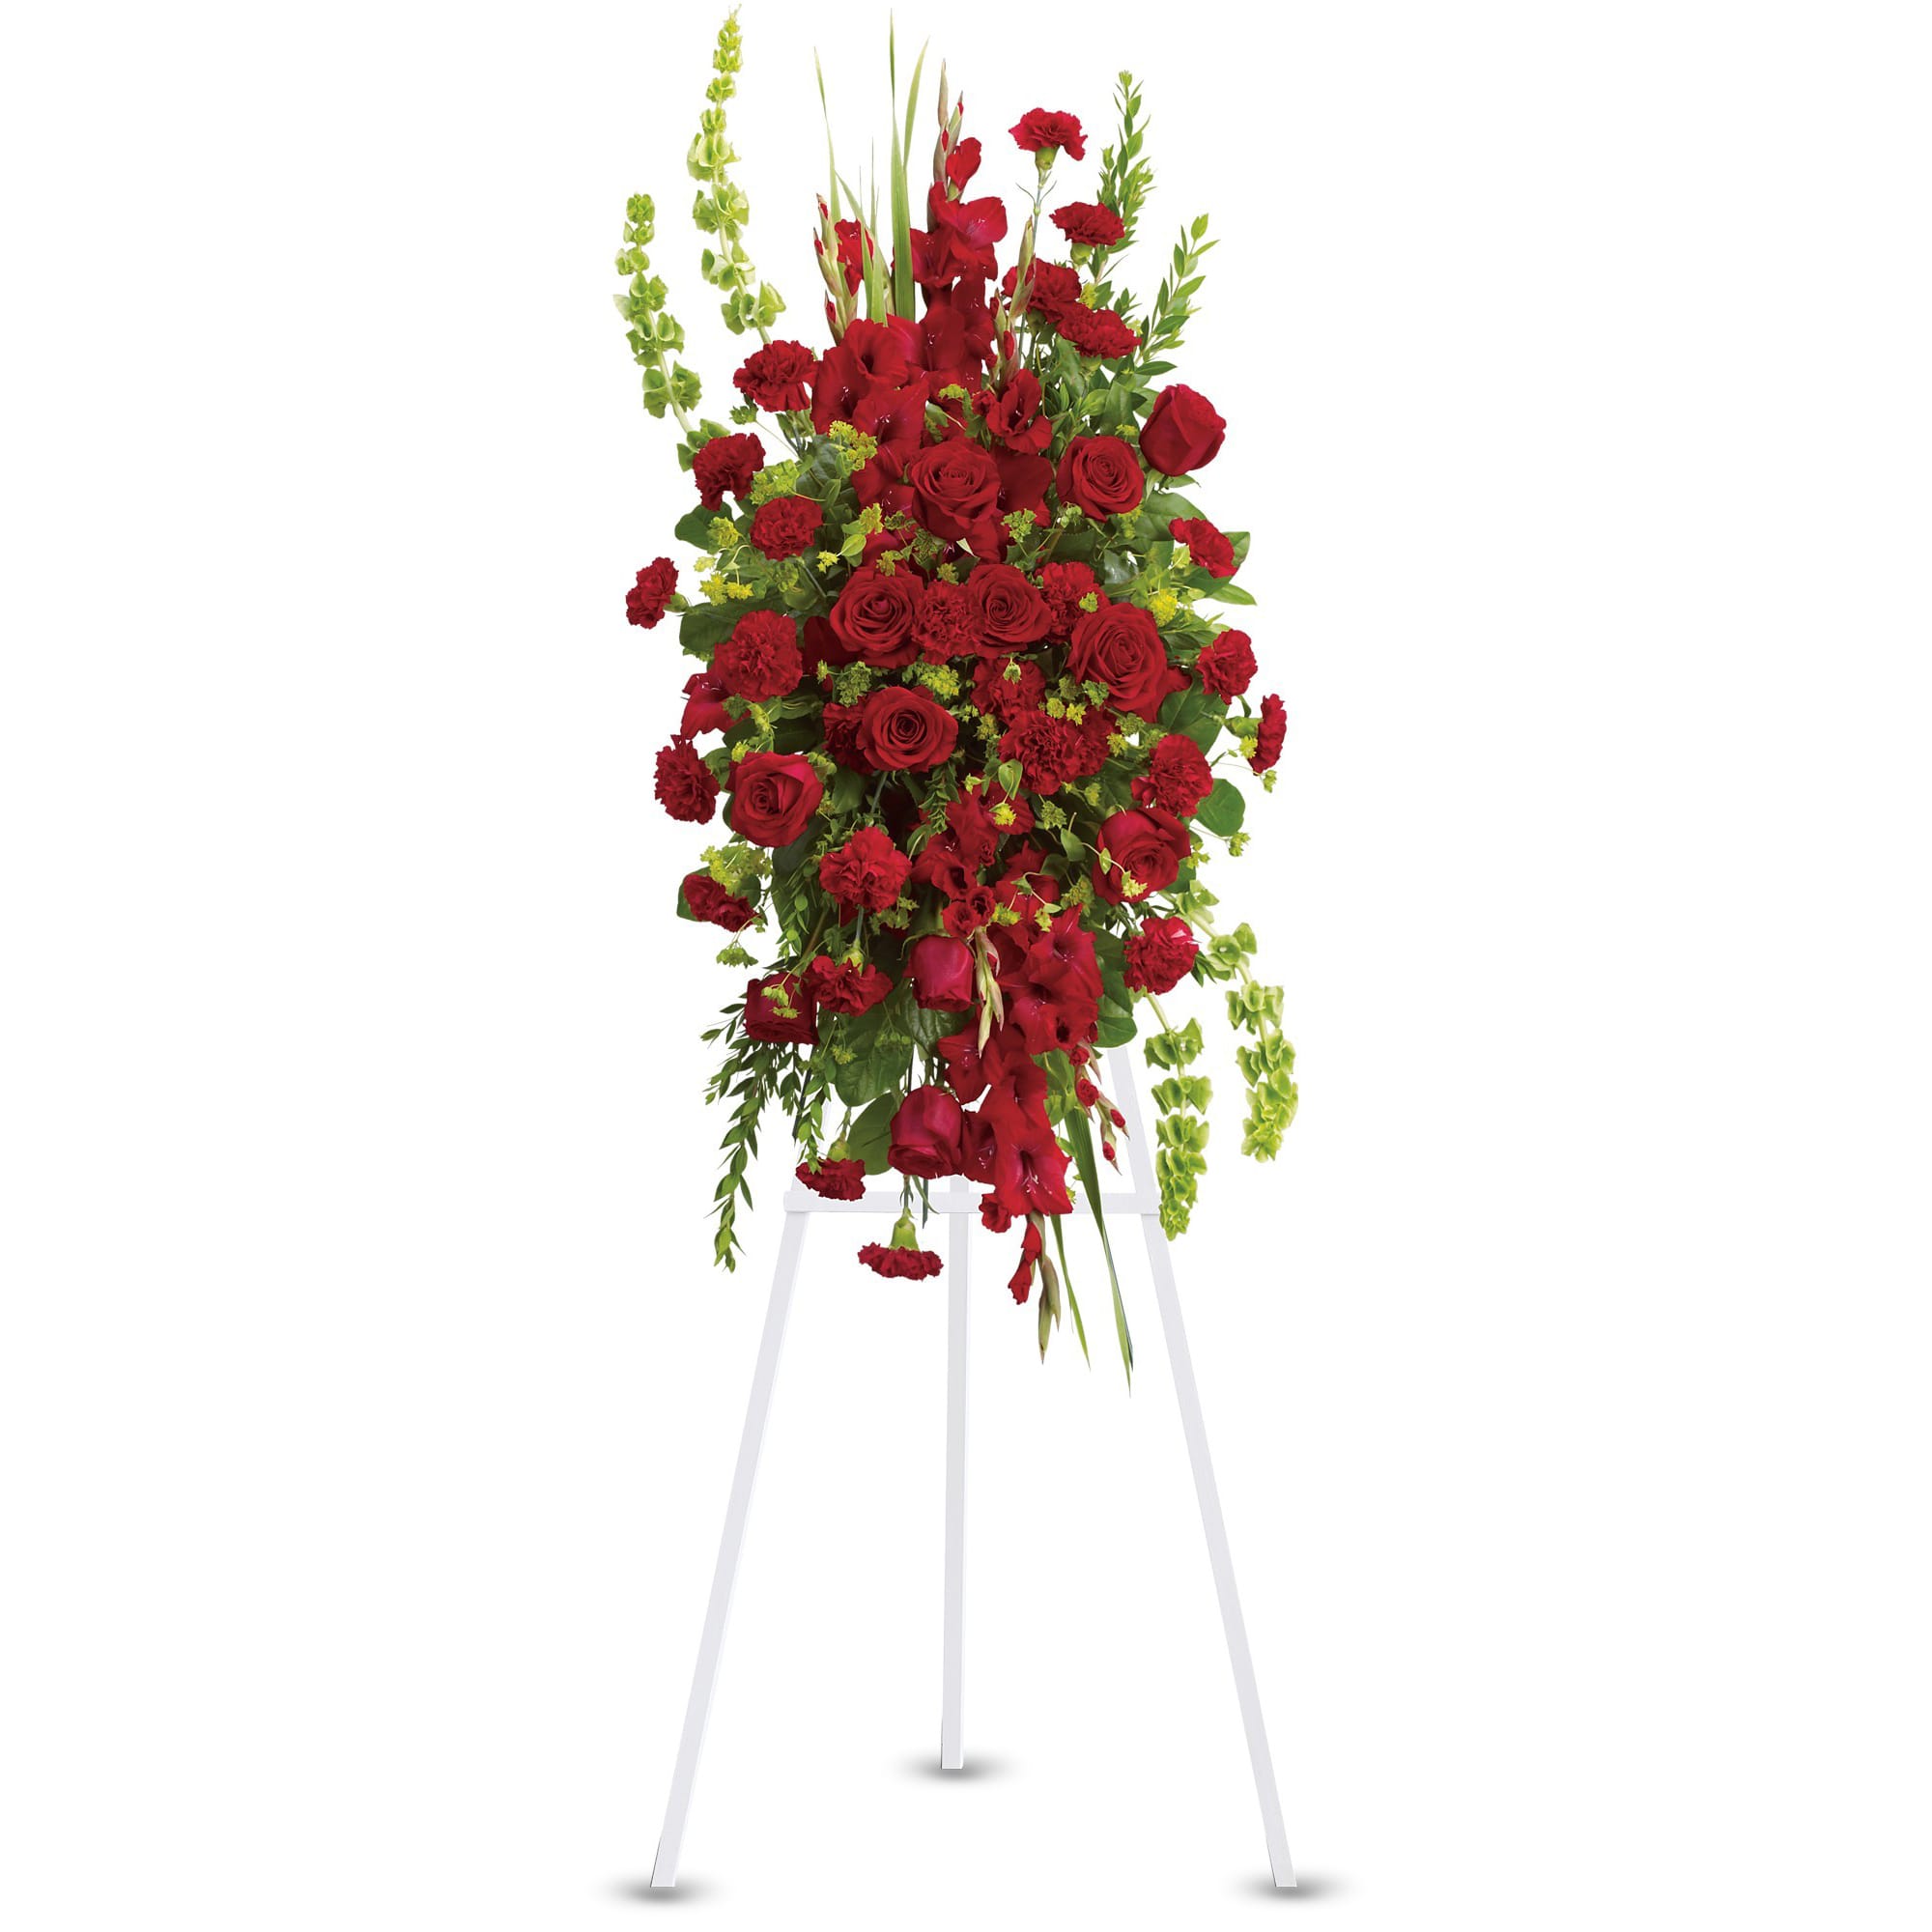 Care and Compassion Spray  - Your care and compassion will be appreciated by all who lay eyes on this radiant standing spray. A variety of lovely vibrant red blossoms contrasted by vivid green of bells of Ireland will deliver your heartfelt condolences. Perfectly. 